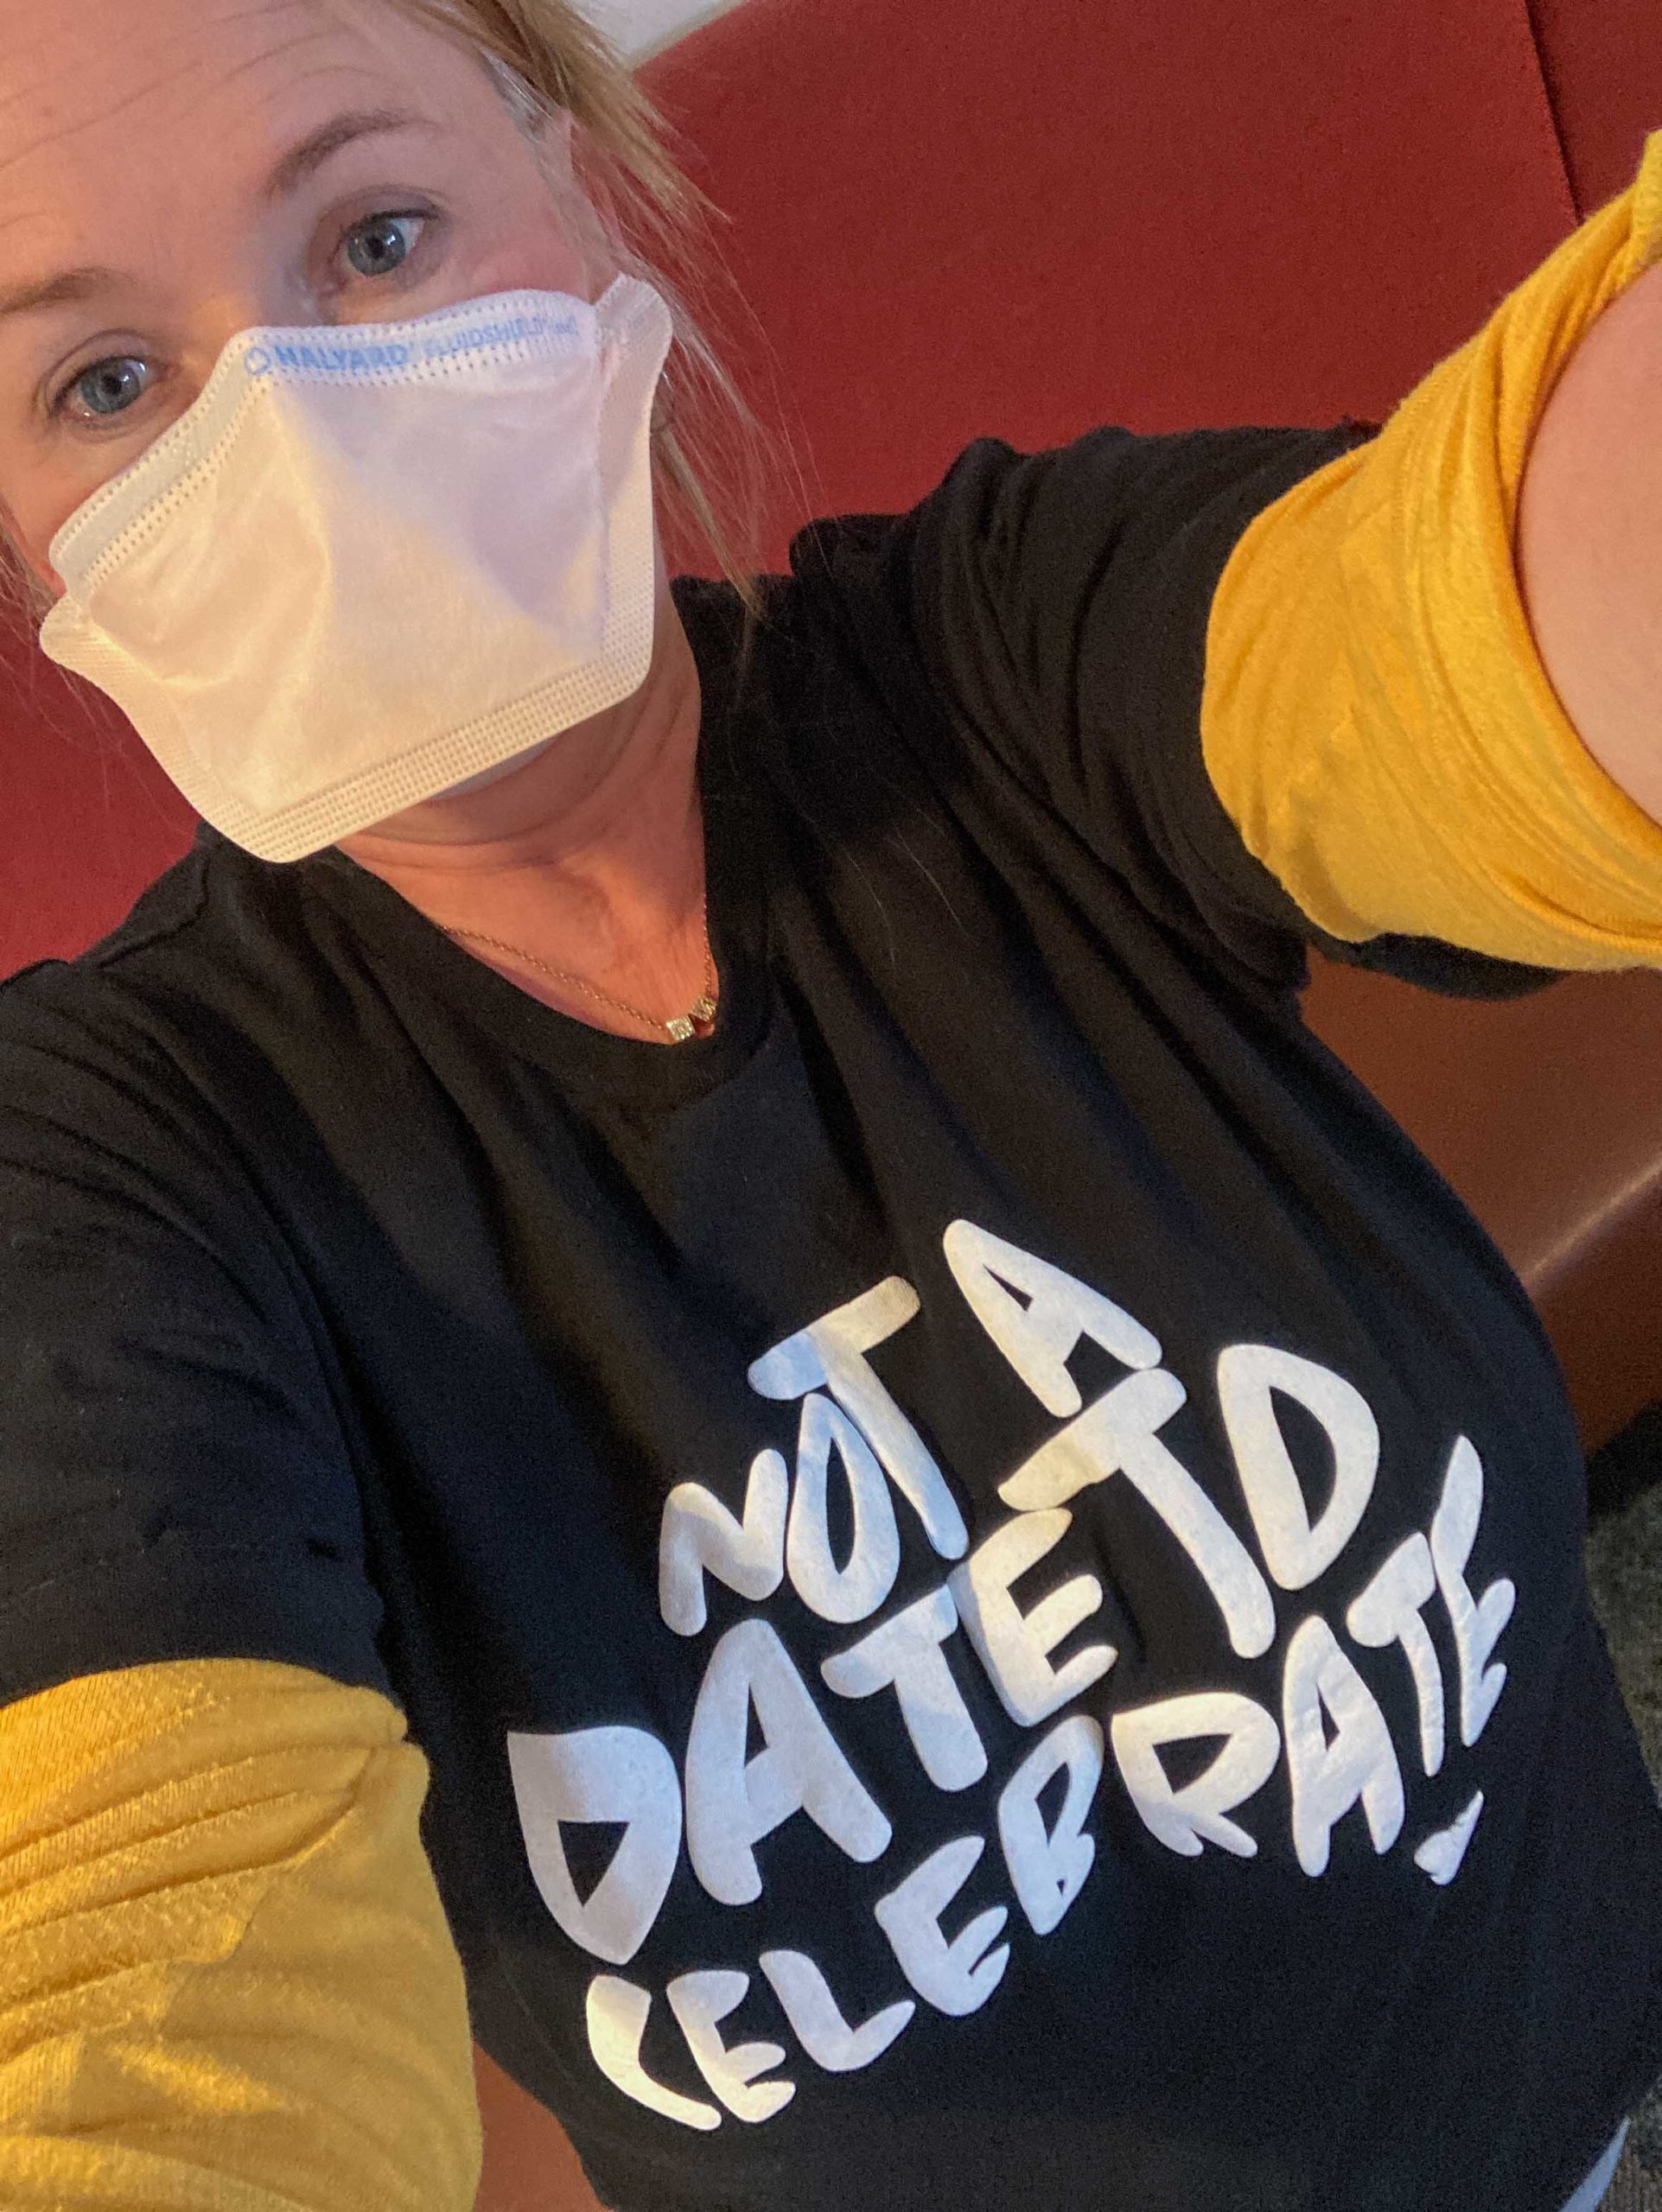 Barb is taking a selfy. She has a black t-shirt with the words "Not A Date To Celebrate" in the shape of Australia. She is wearing a face mask